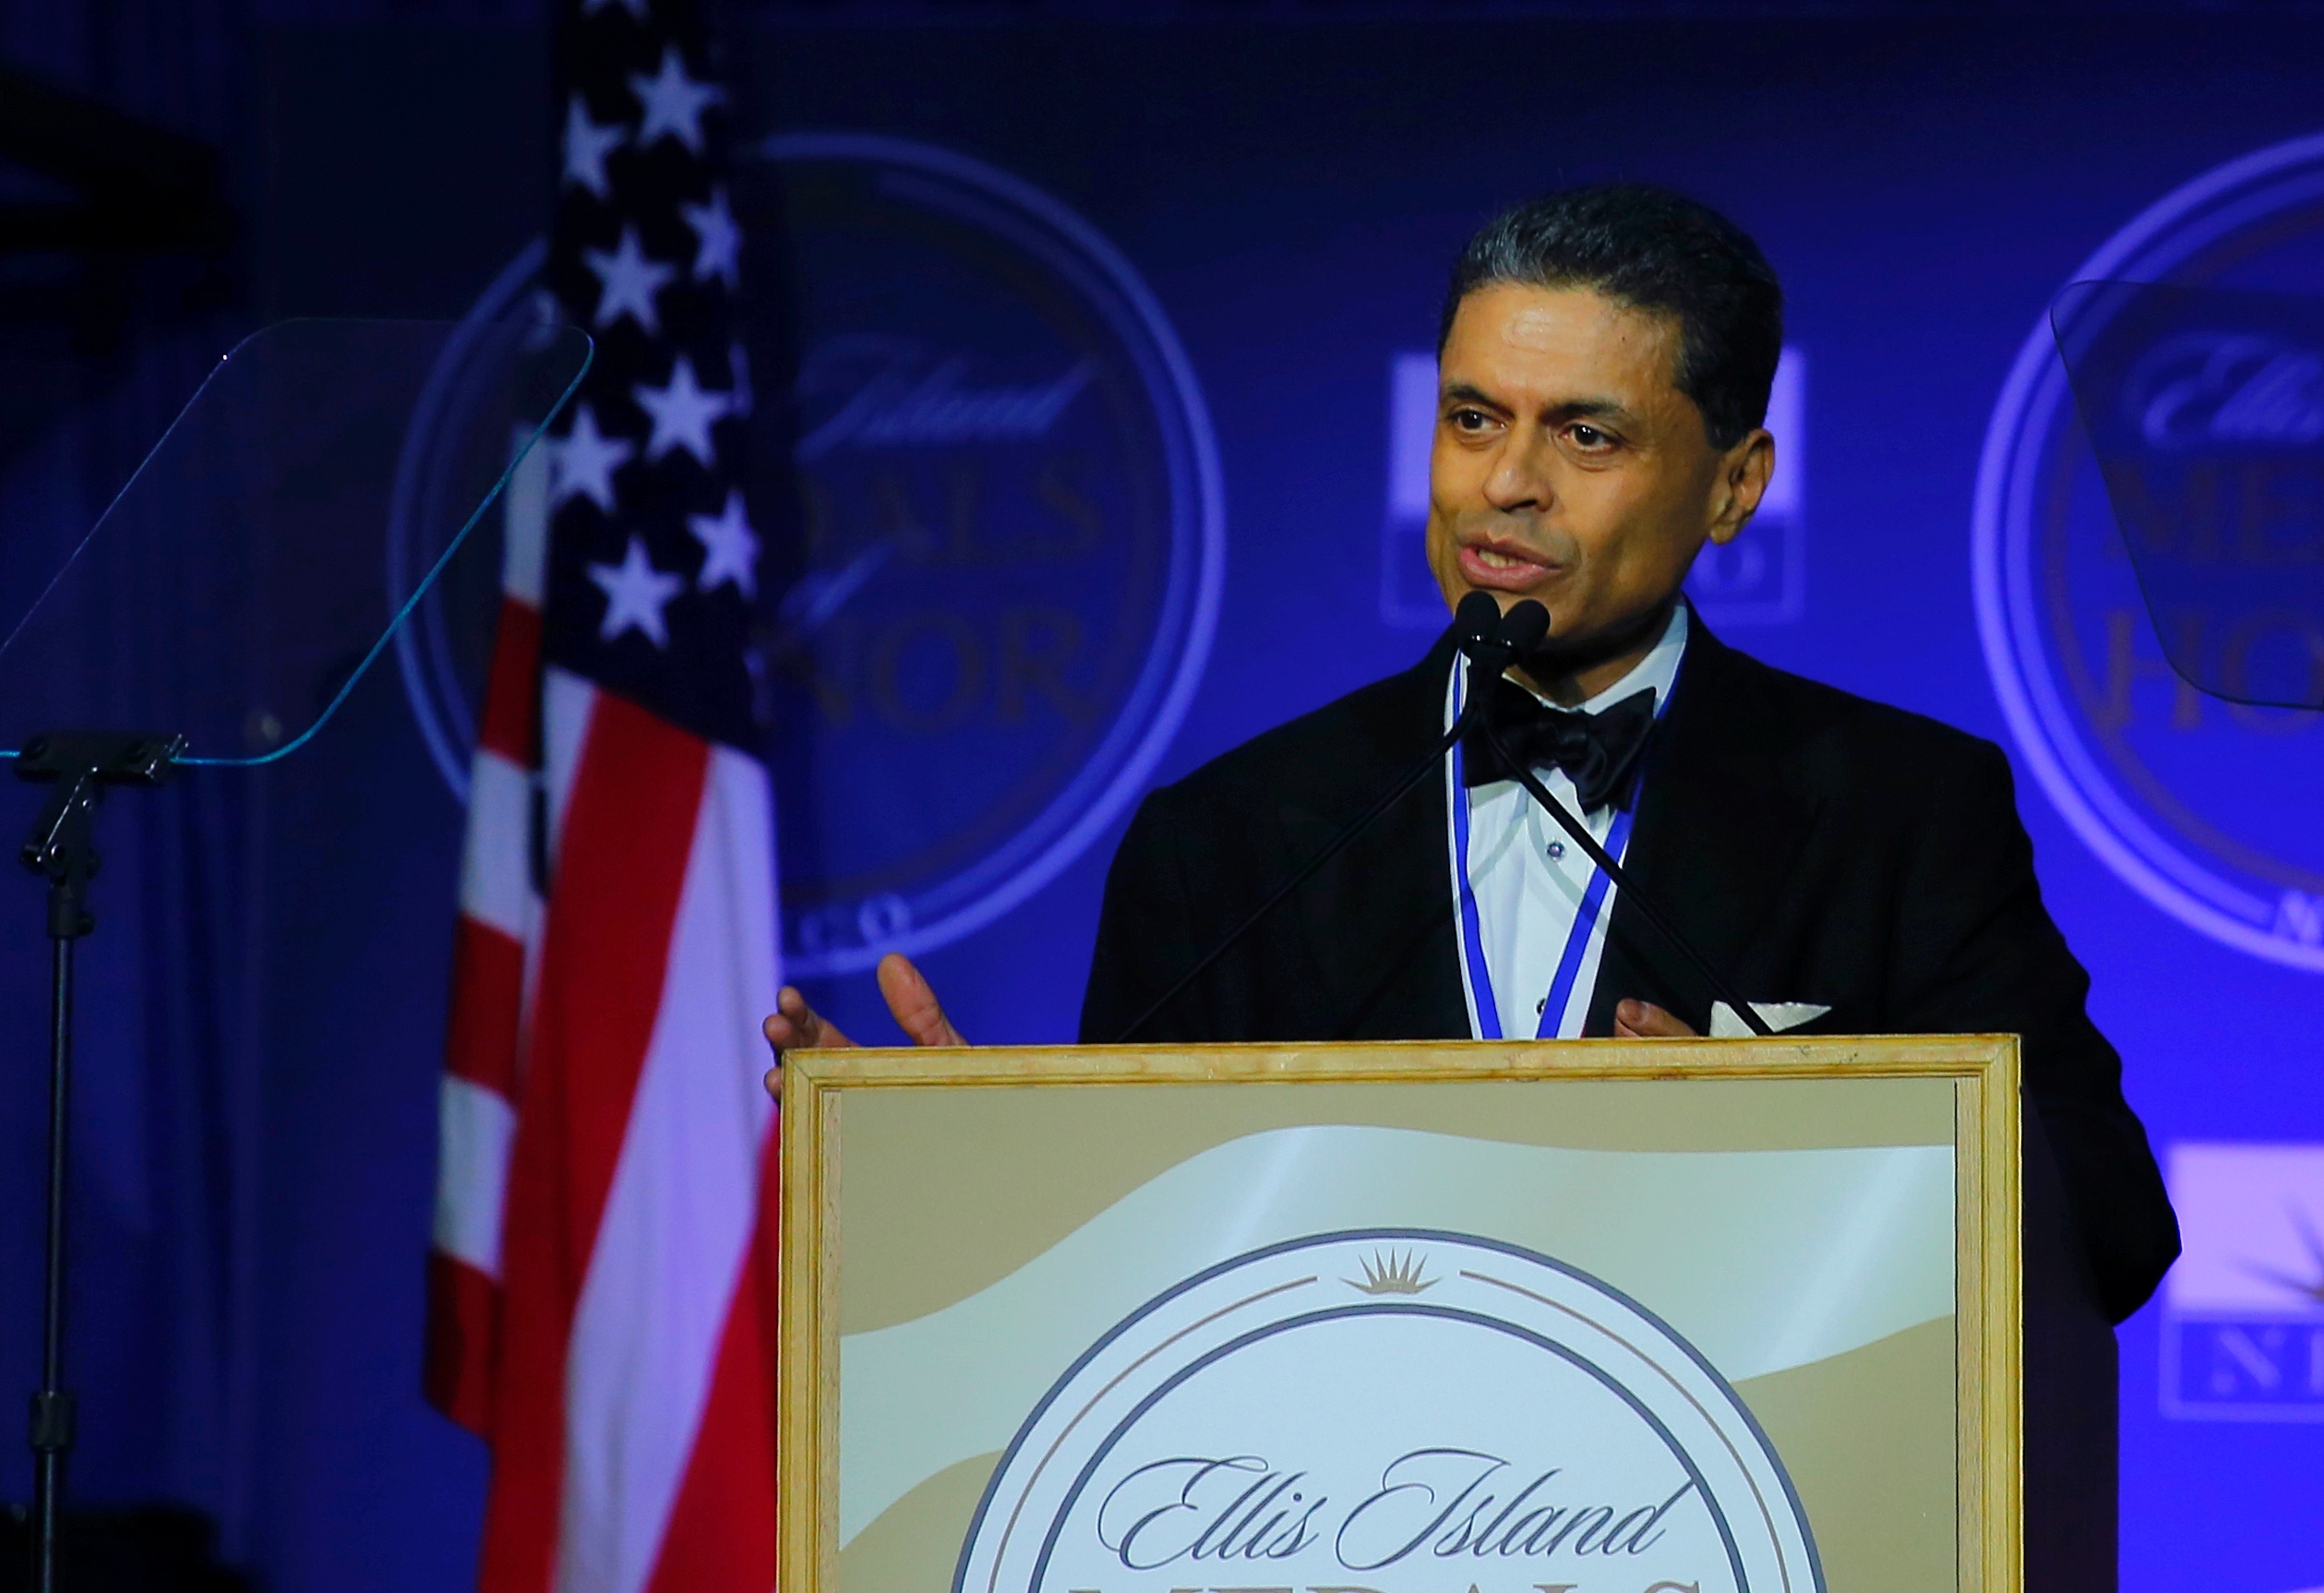 A man wearing a black suit jacket and bowtie, smiling slightly, speaks into a microphone while standing behind a podium. An American flag stands behind him.